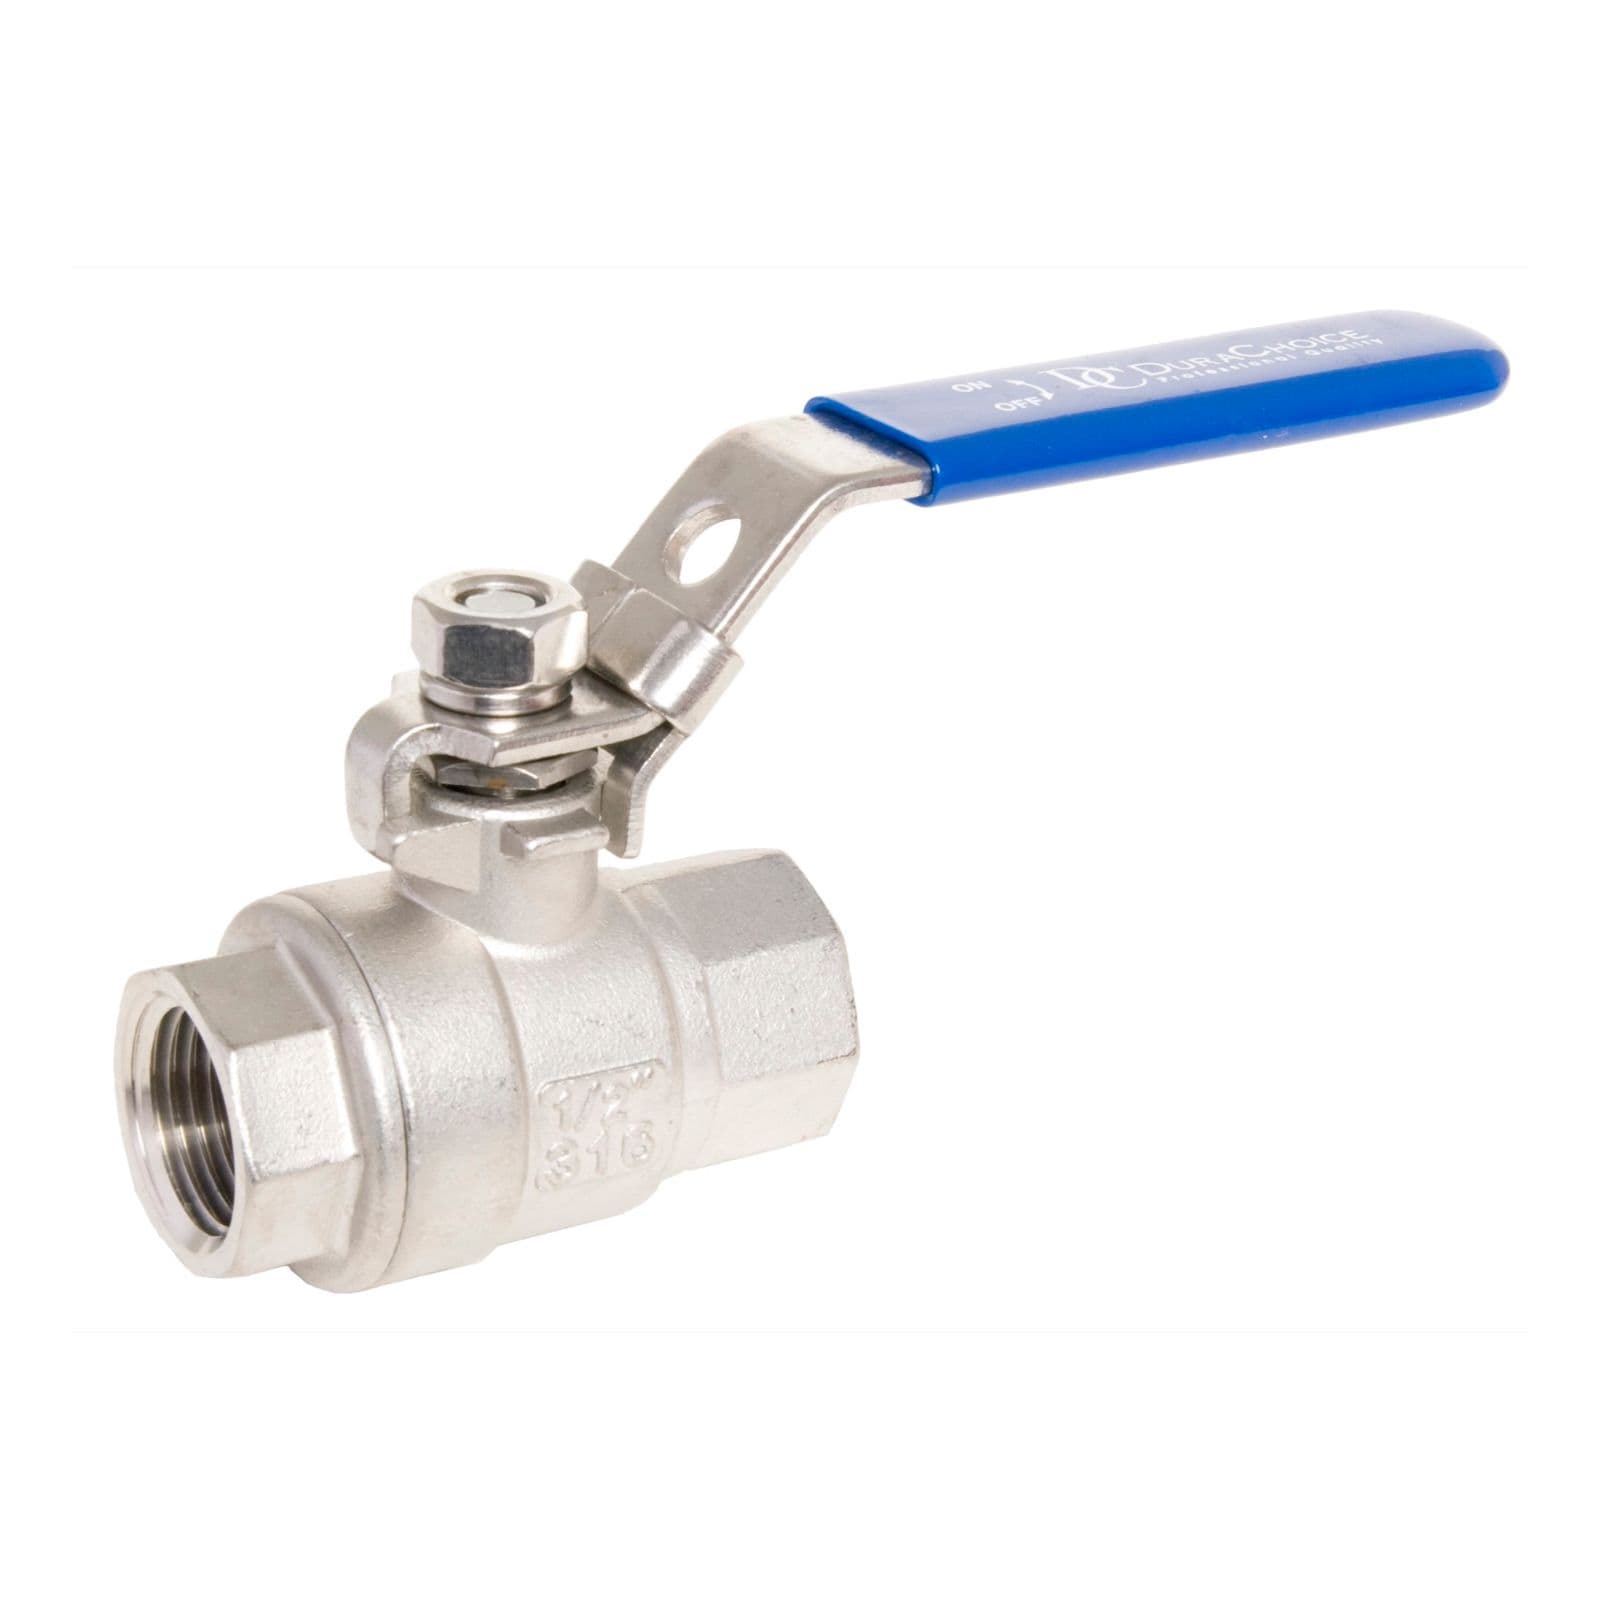 Full bore BV-C1000 3 piece 316 Stainless Steel Ball Valve 1" 1000 psi WOG 